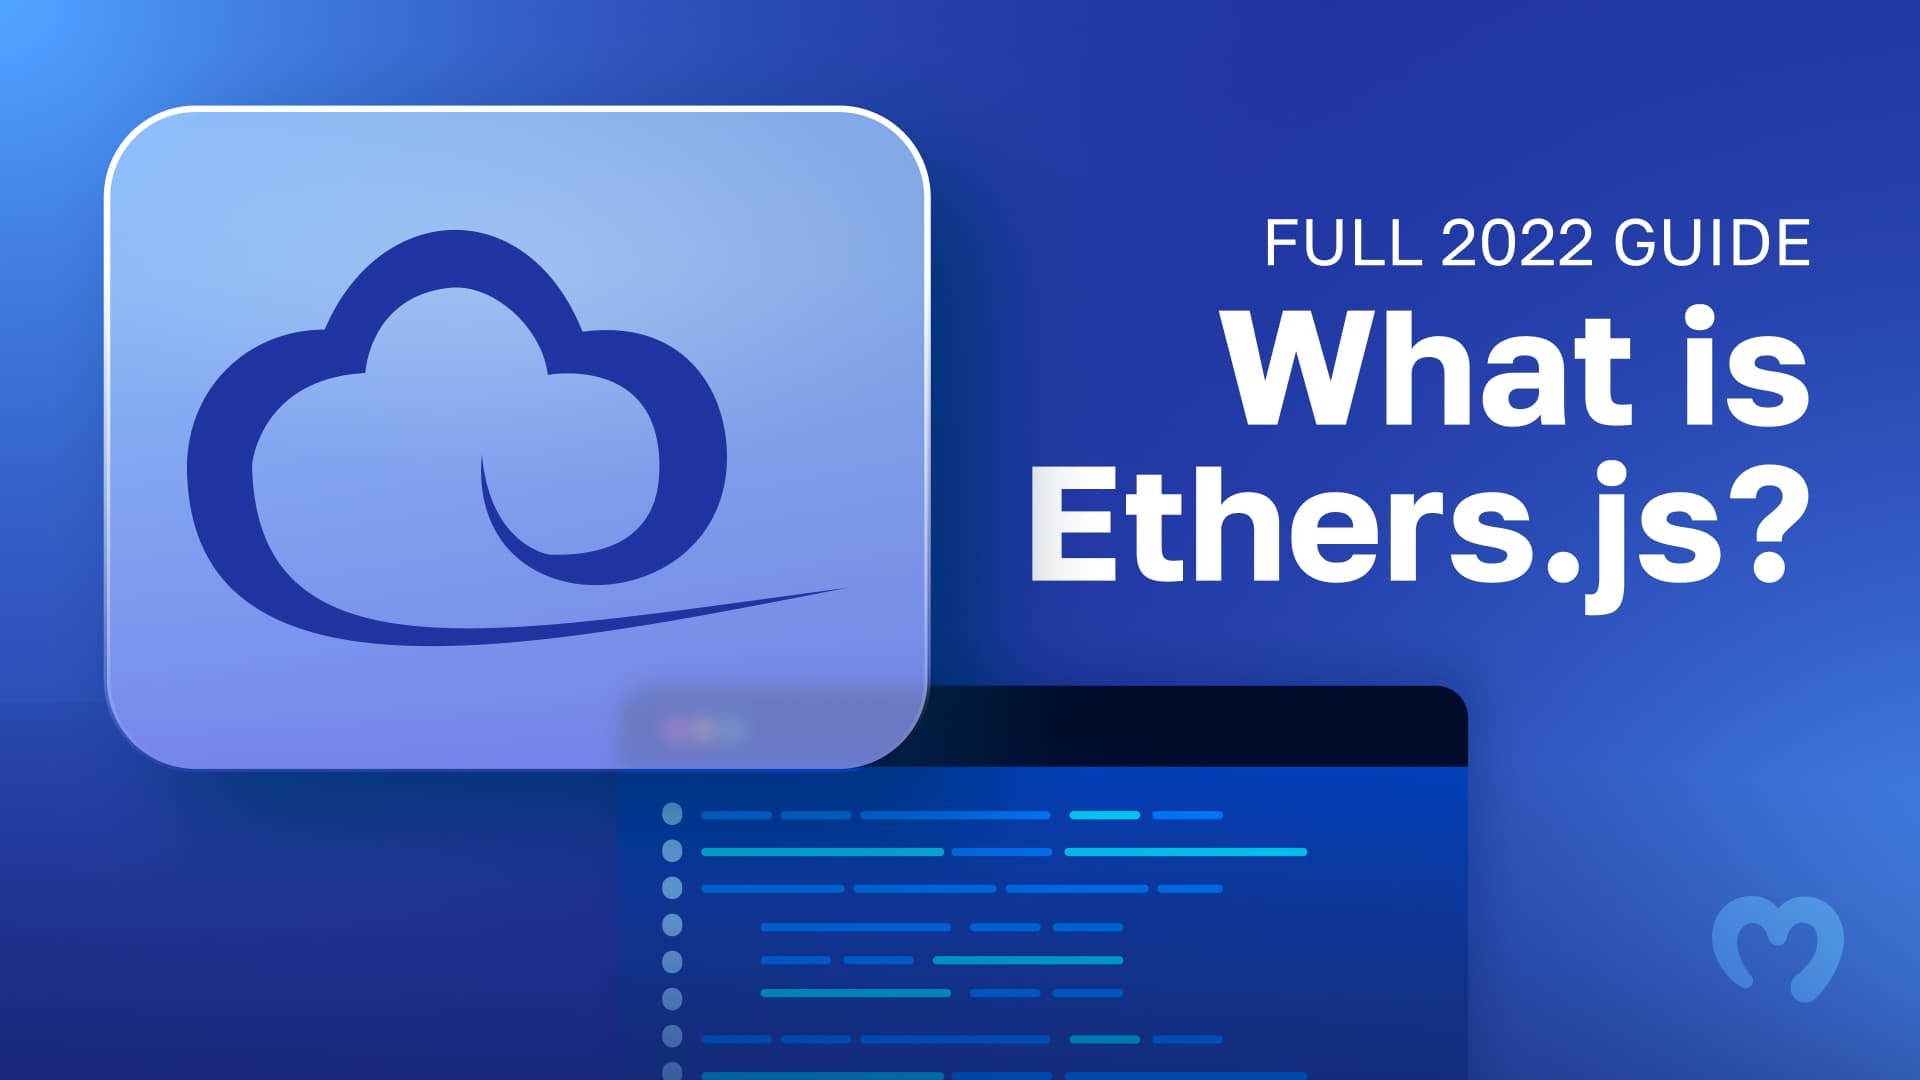 exploring the question what is ethers.js in this full guide